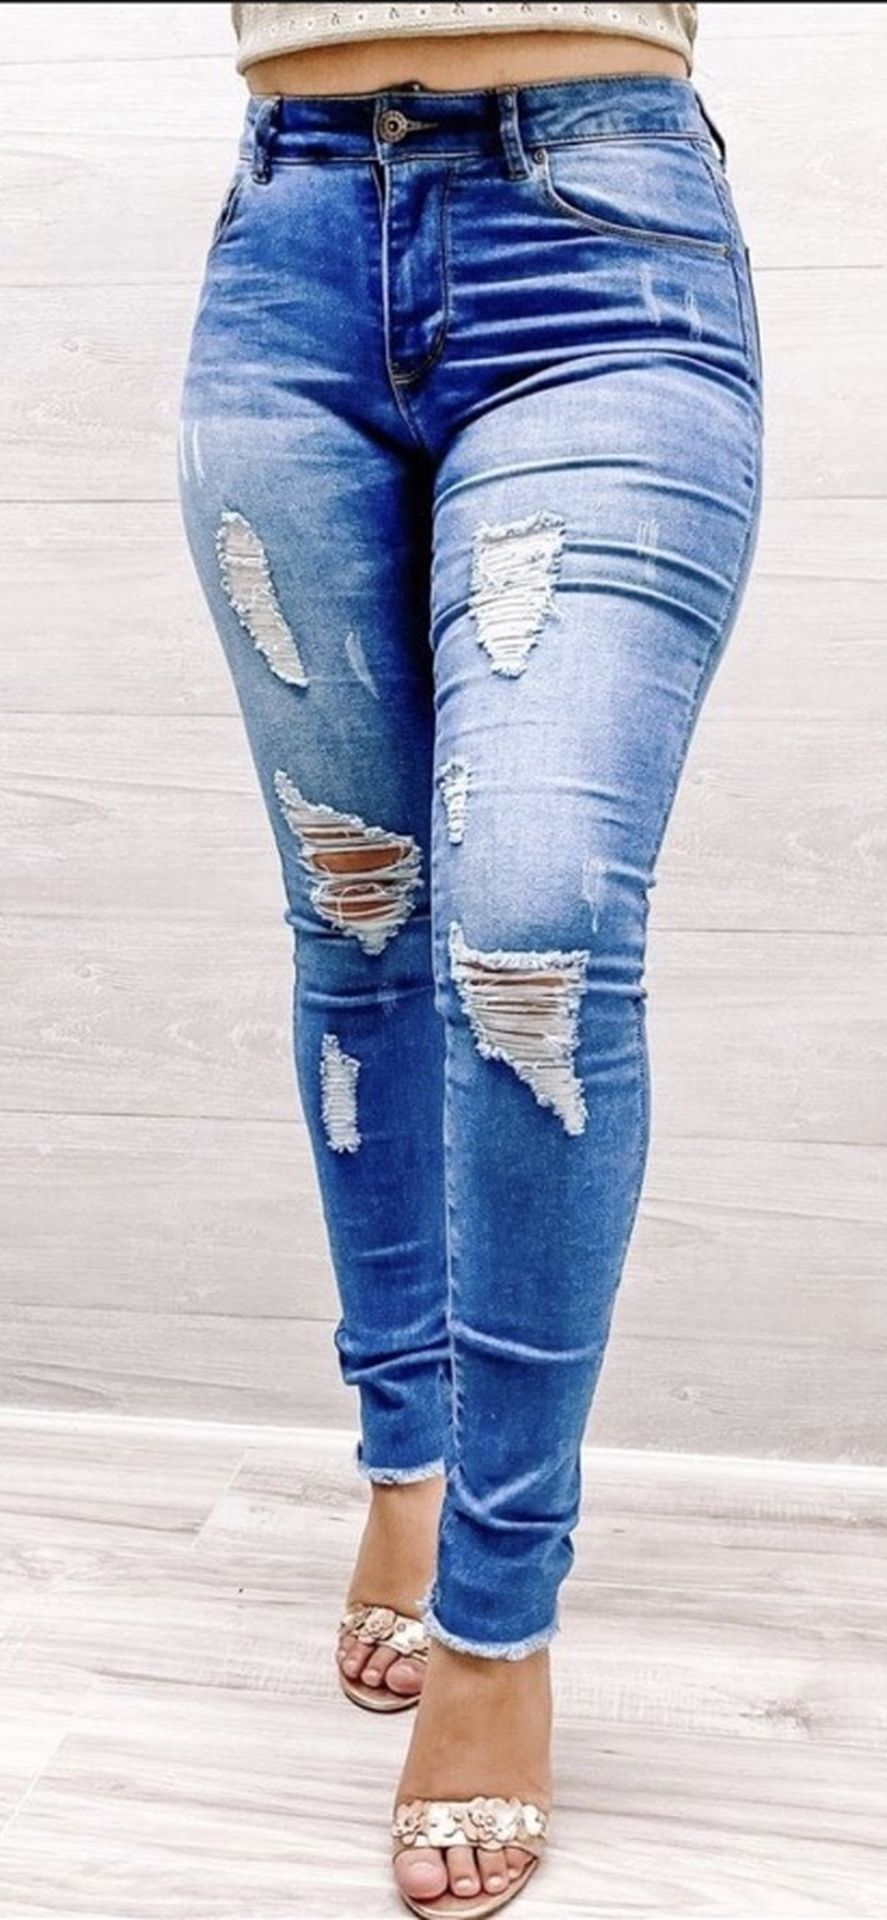 Skinny ripped jeans